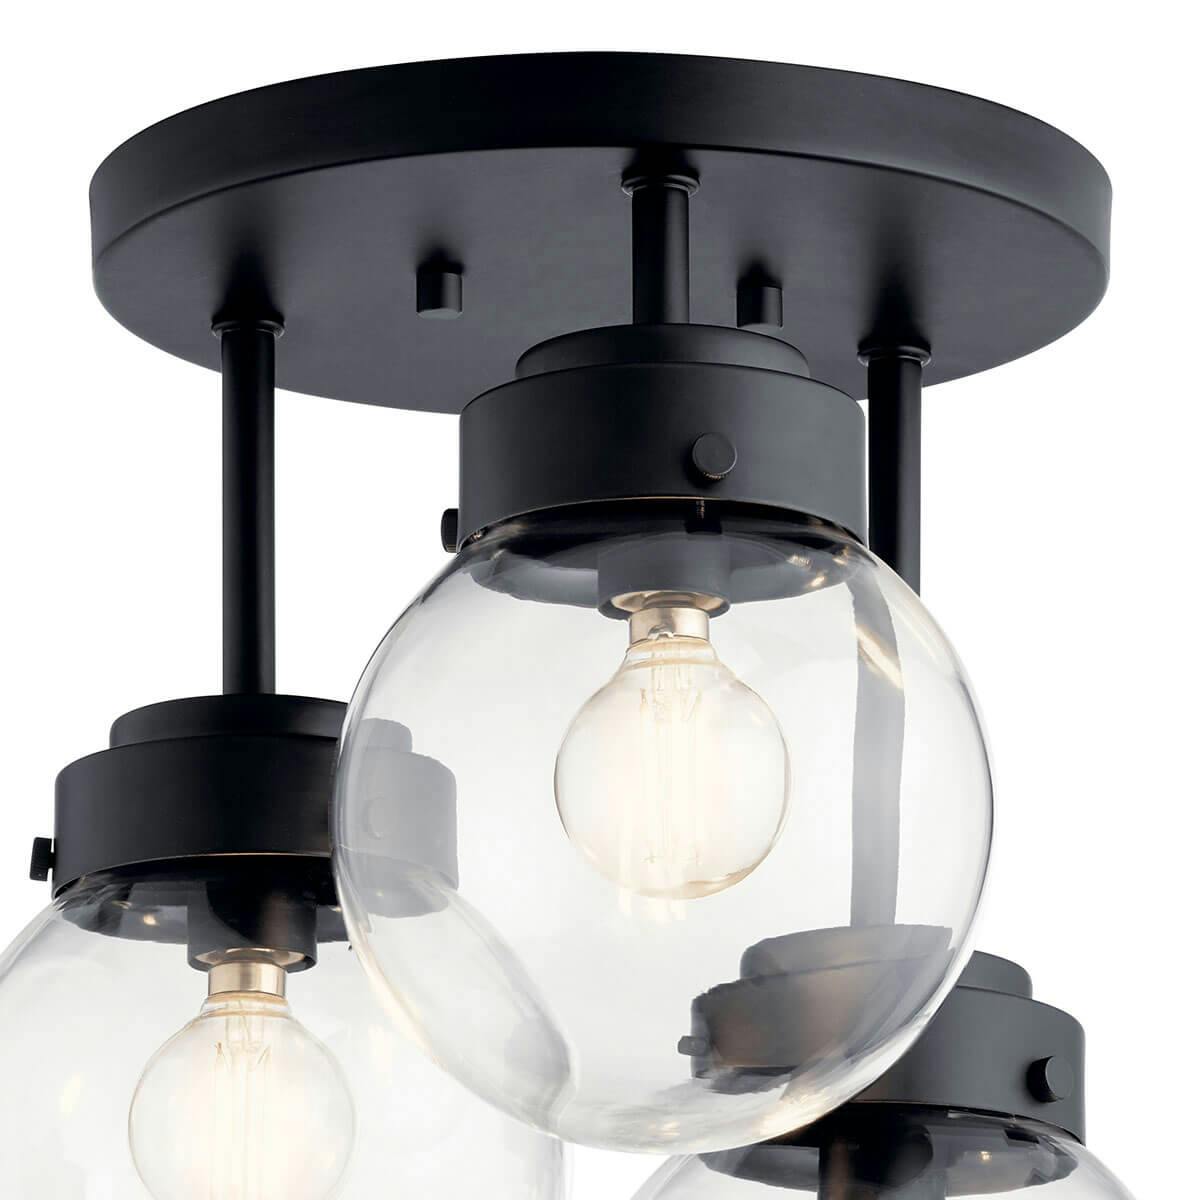 Close up view of the Strabo 12" 3 Light Semi Flush Black on a white background